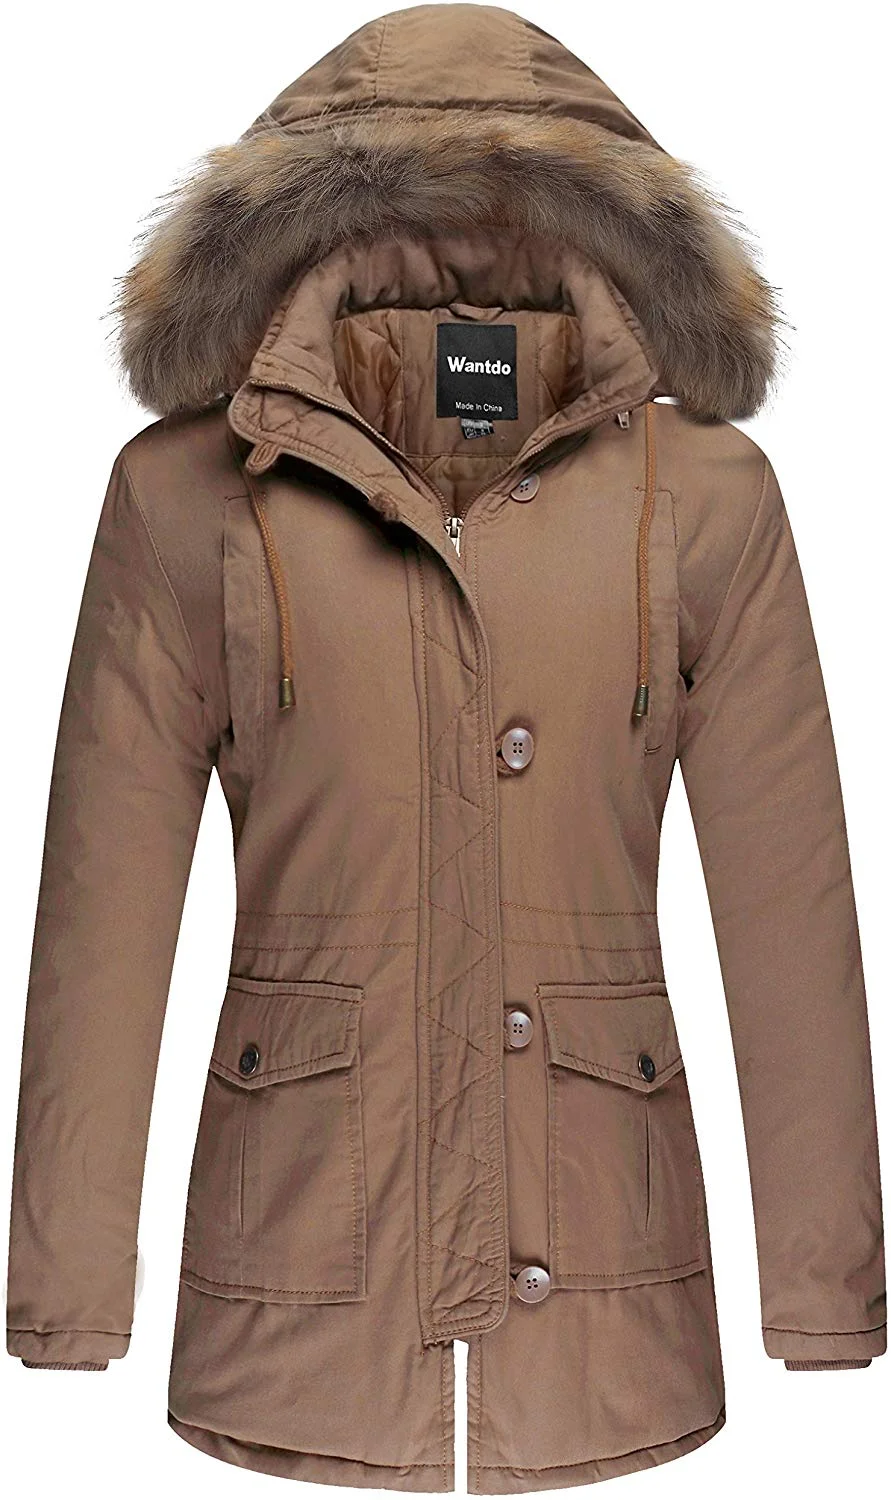 Women's Cotton Thicken Padded Parka Winter Jacket Removable Fur Hood Coat